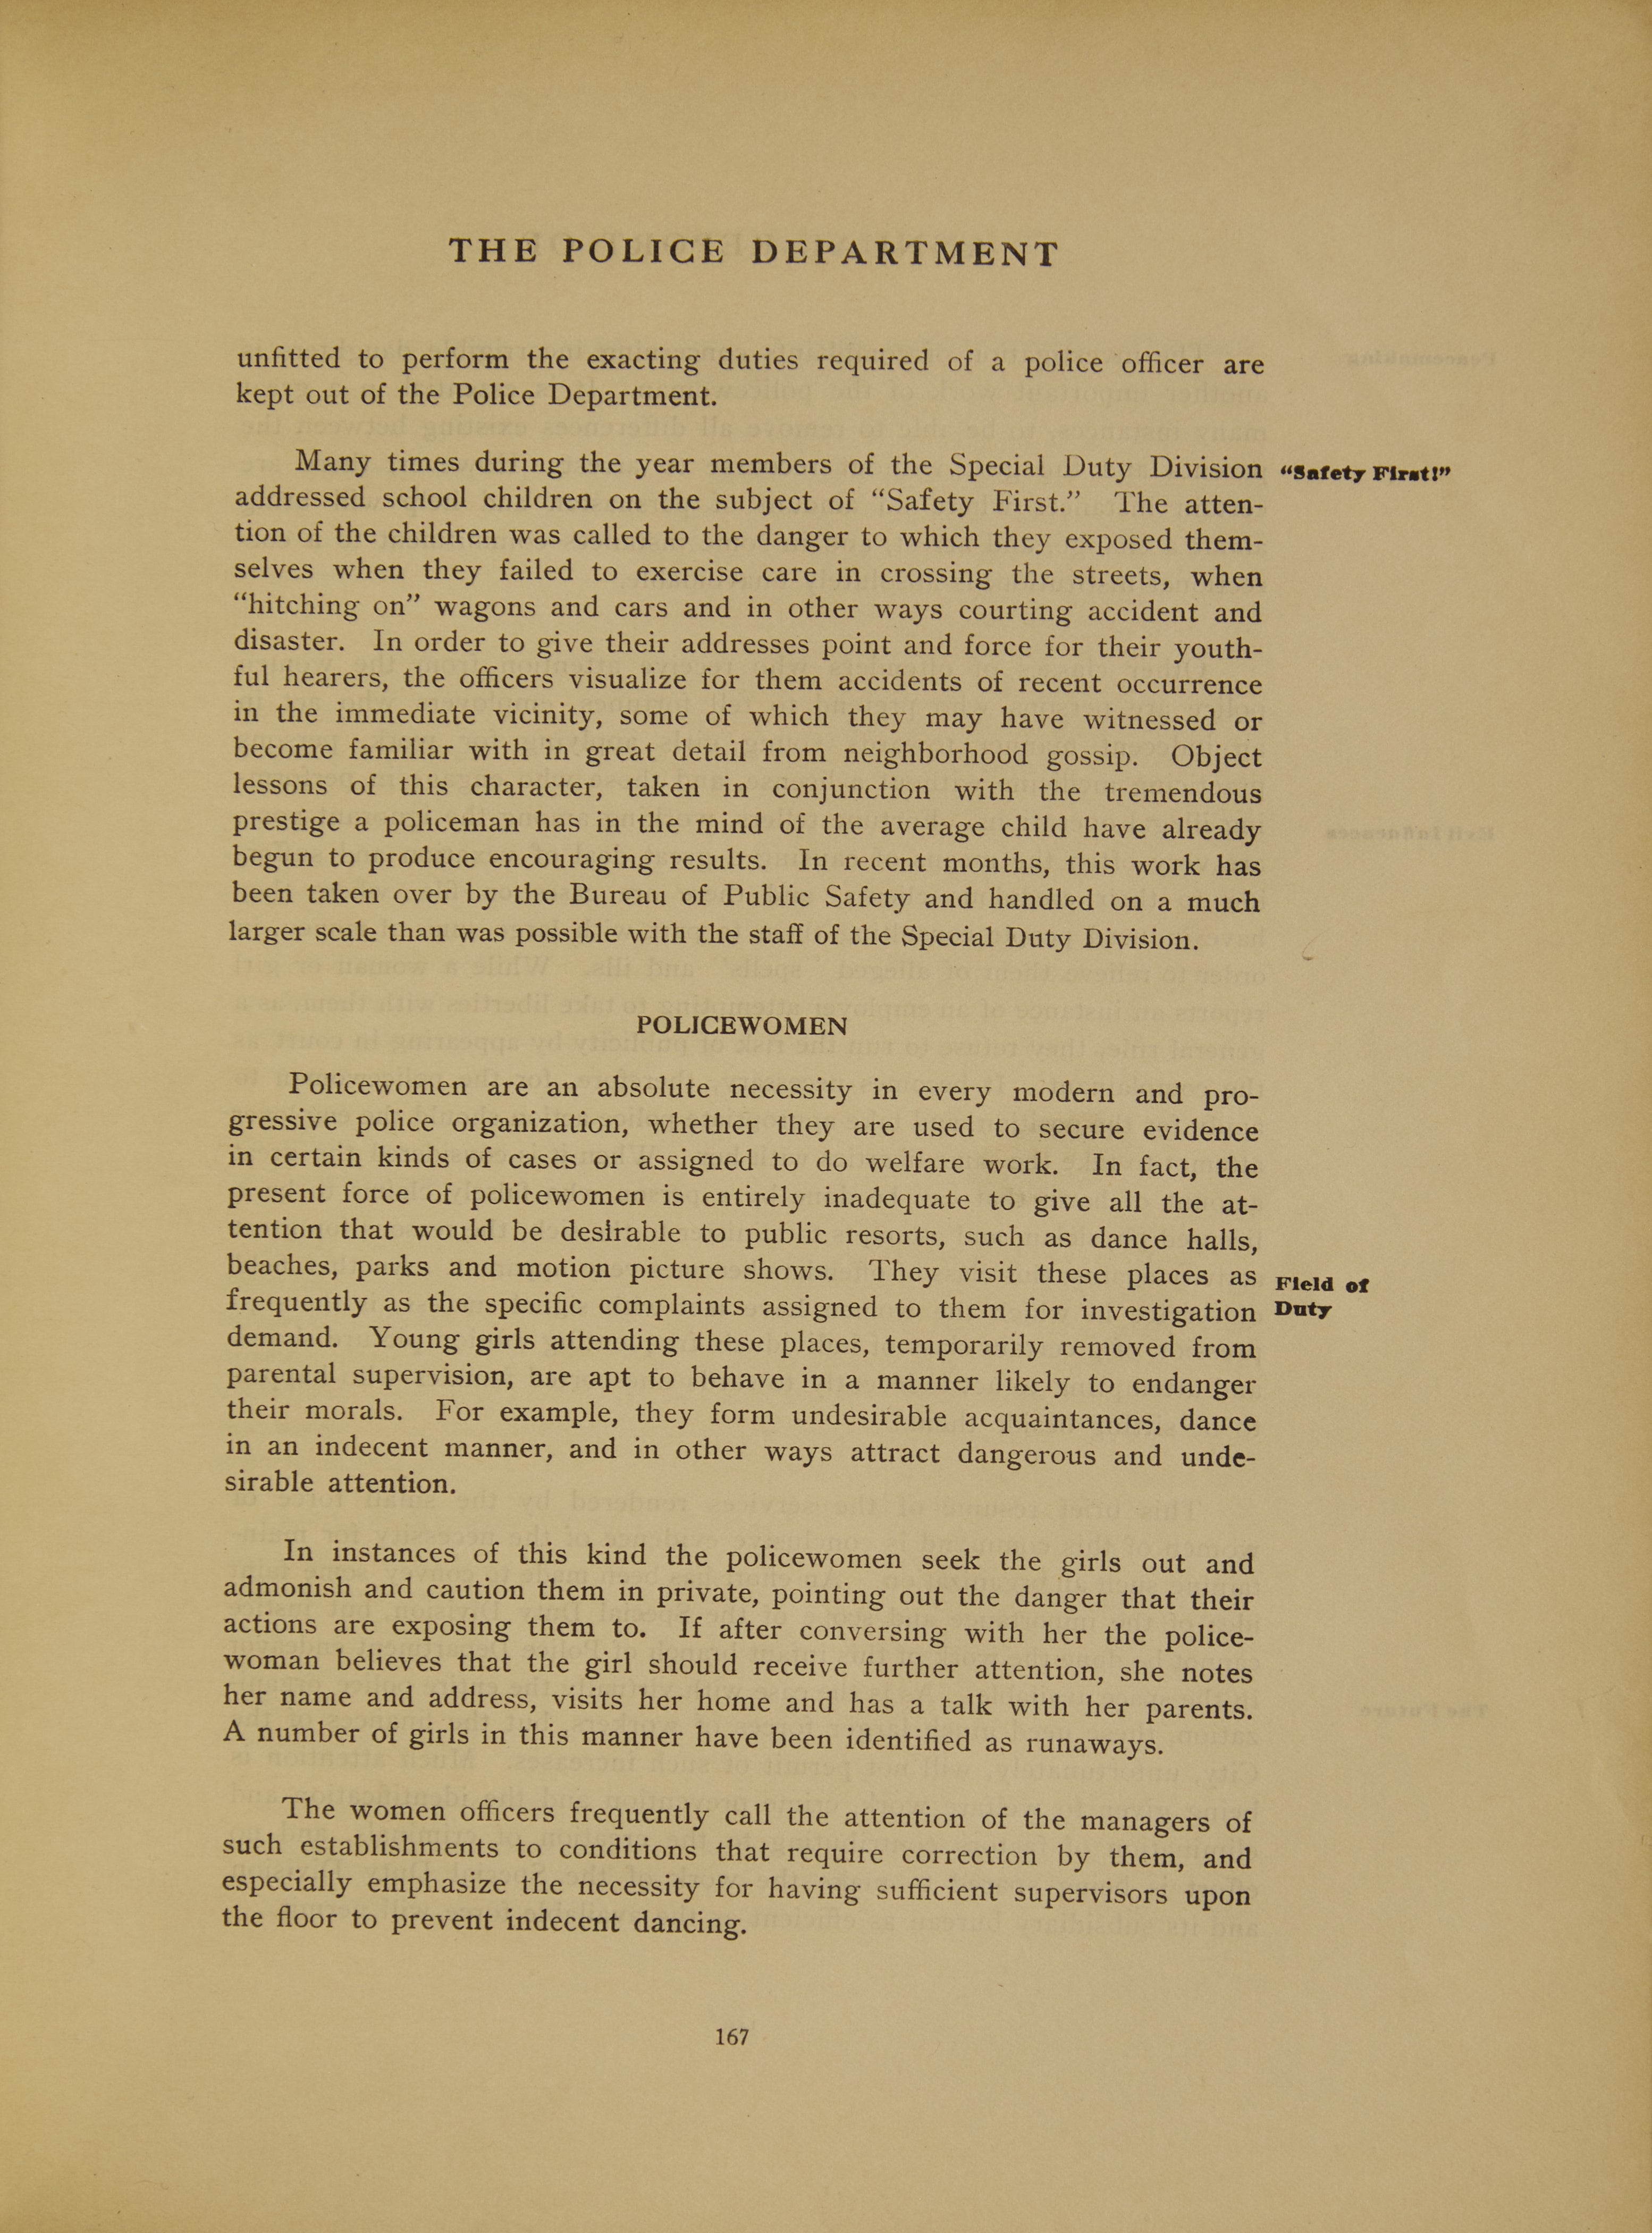 Page of text stating that policewomen are an absolute necessity in every modern and progressive police organization.